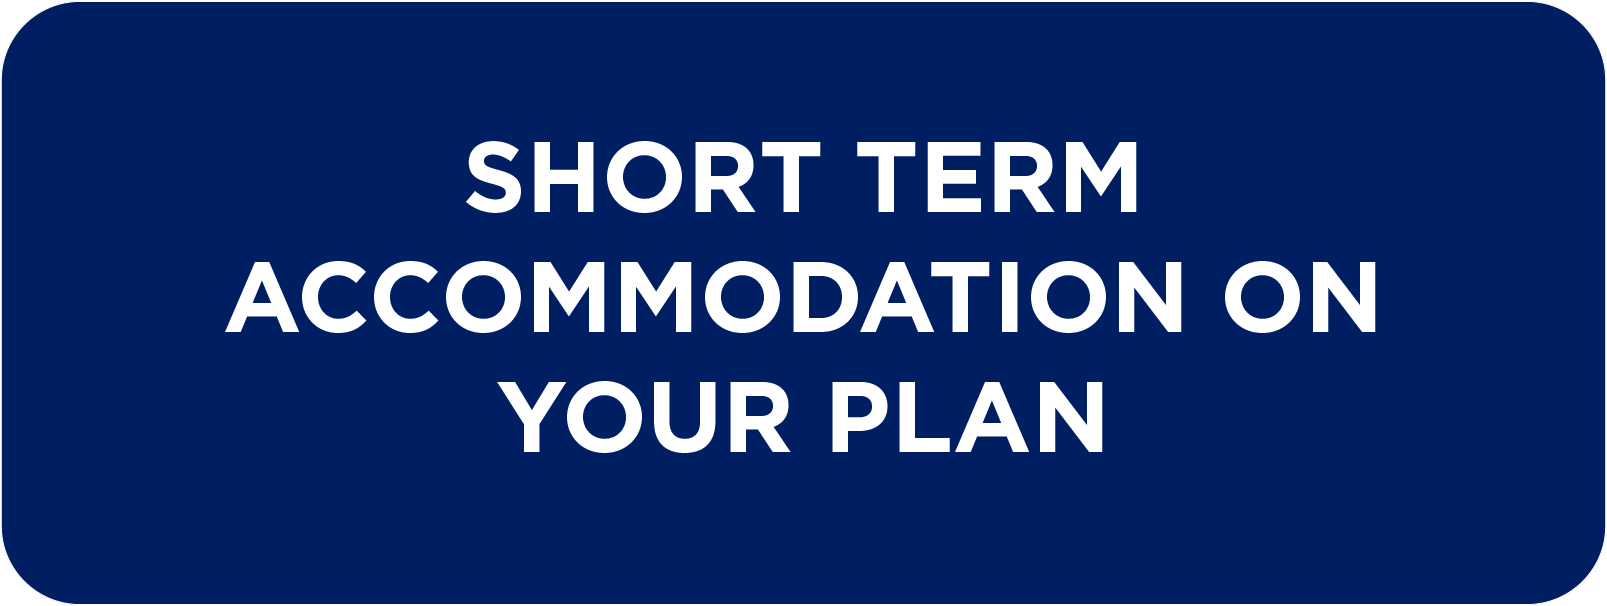 Short term accommodation on your plan